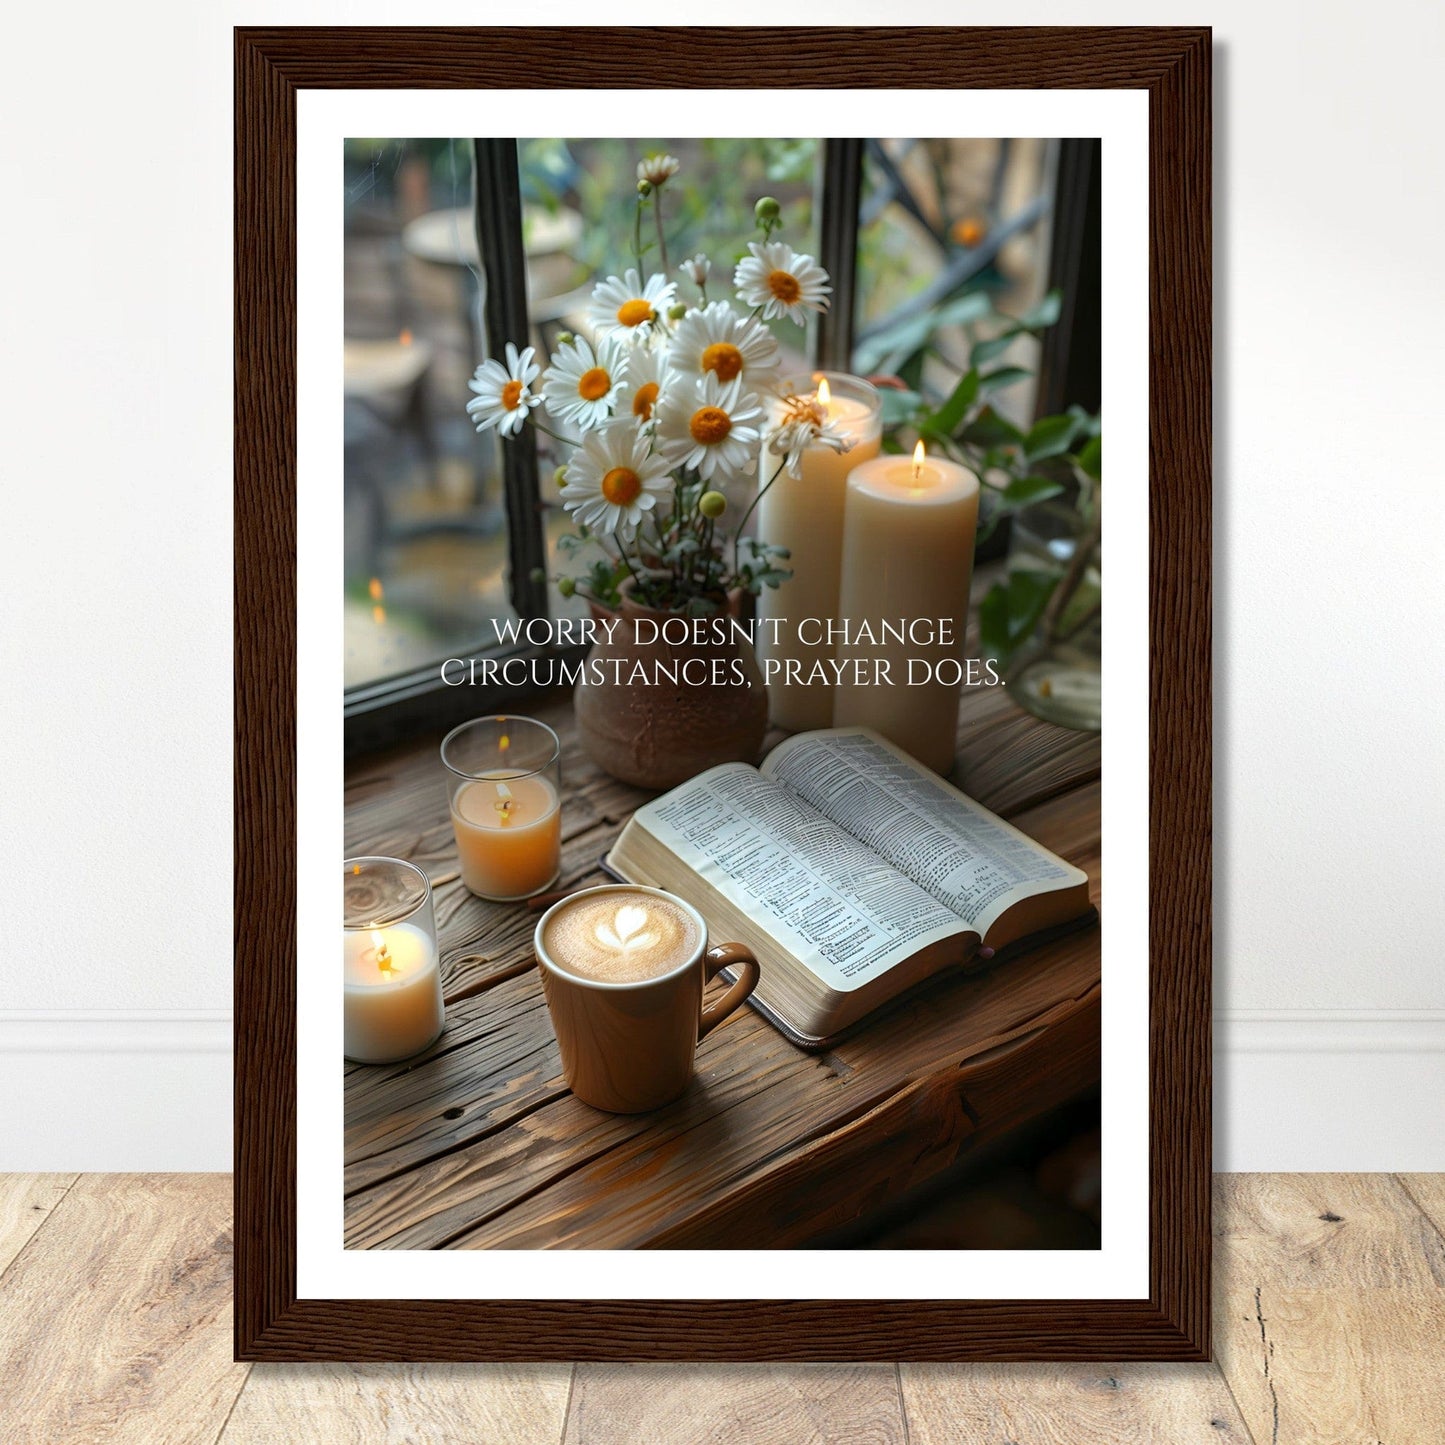 Coffee With My Father Print Material 21x29.7 cm / 8x12″ / Framed / Dark wood frame Prayer Changes Things - Custom Art